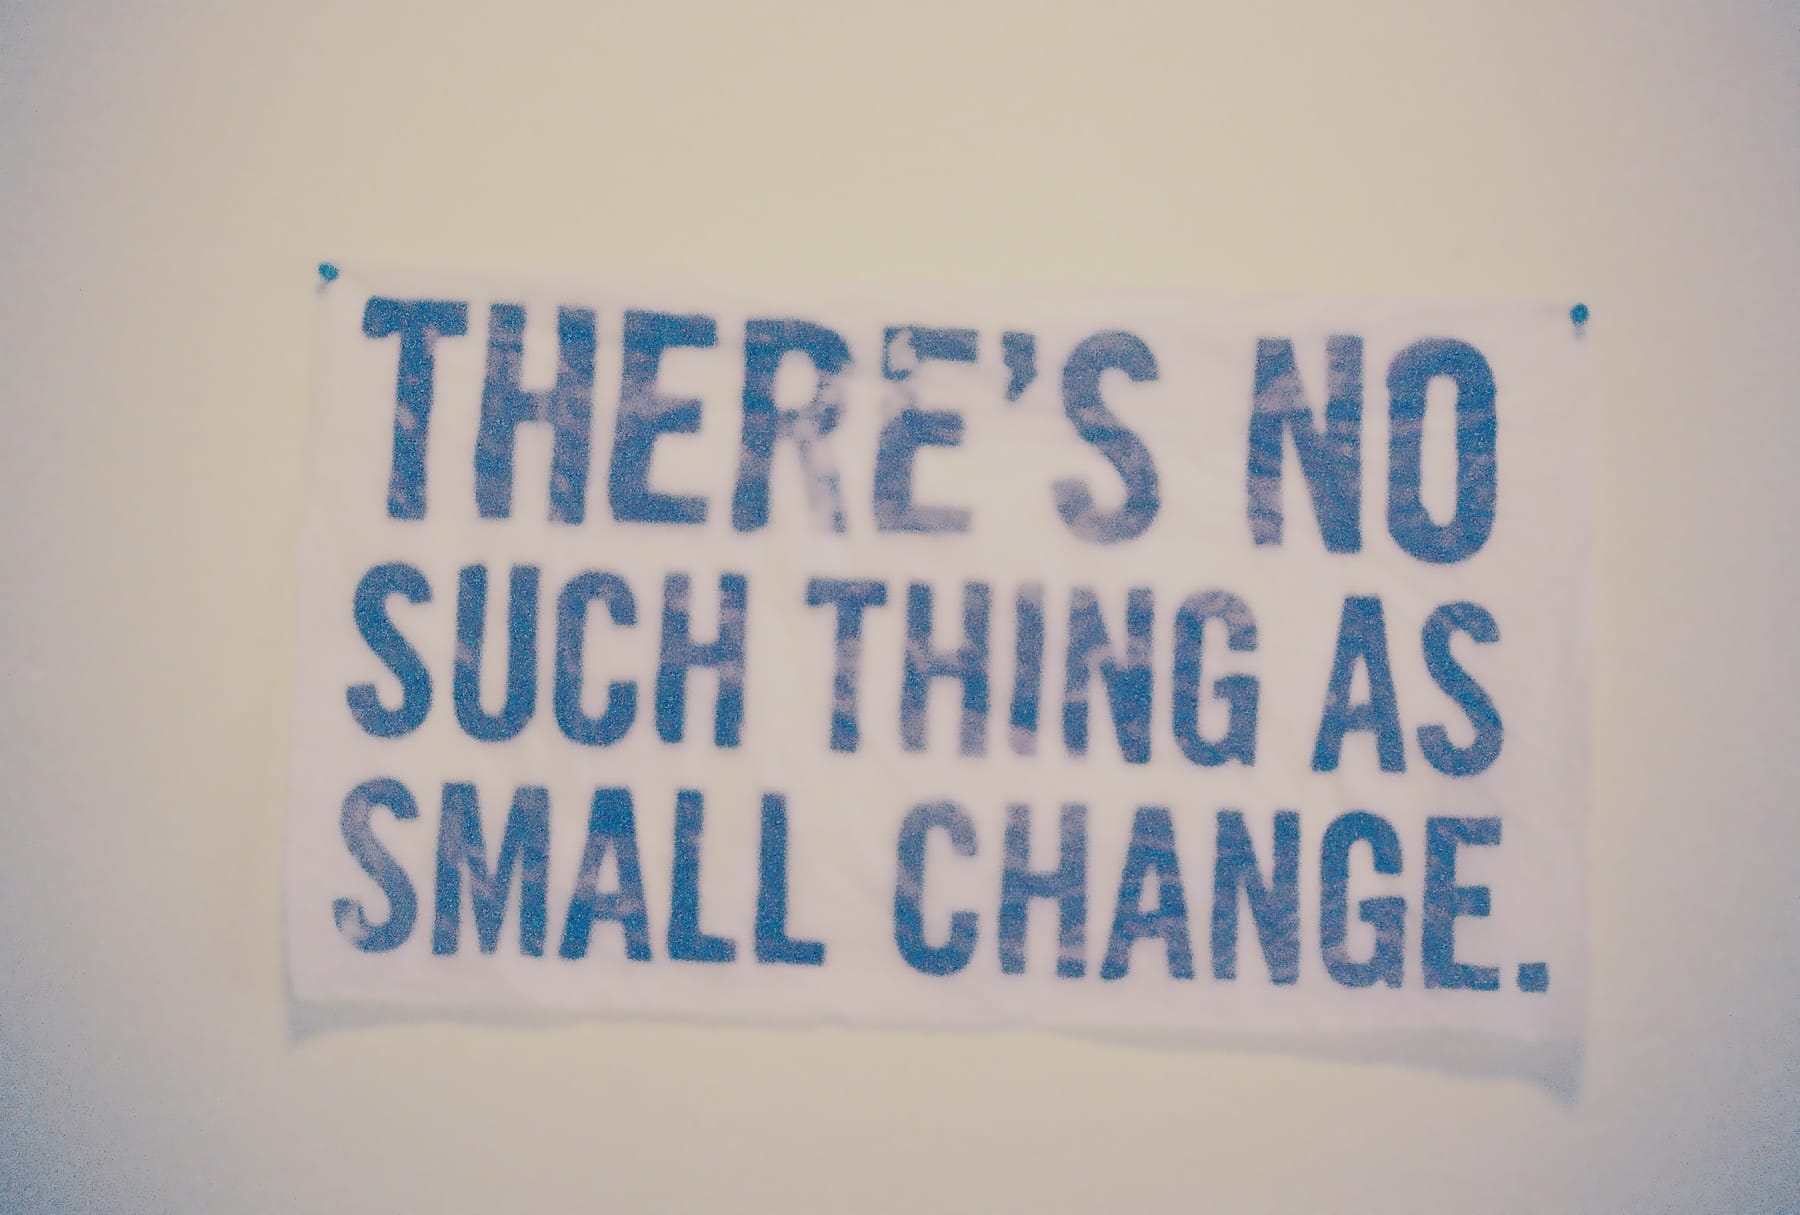 A banner with the phrase "there's no such thing as small change" in blue letters on a white background, slightly out of focus.